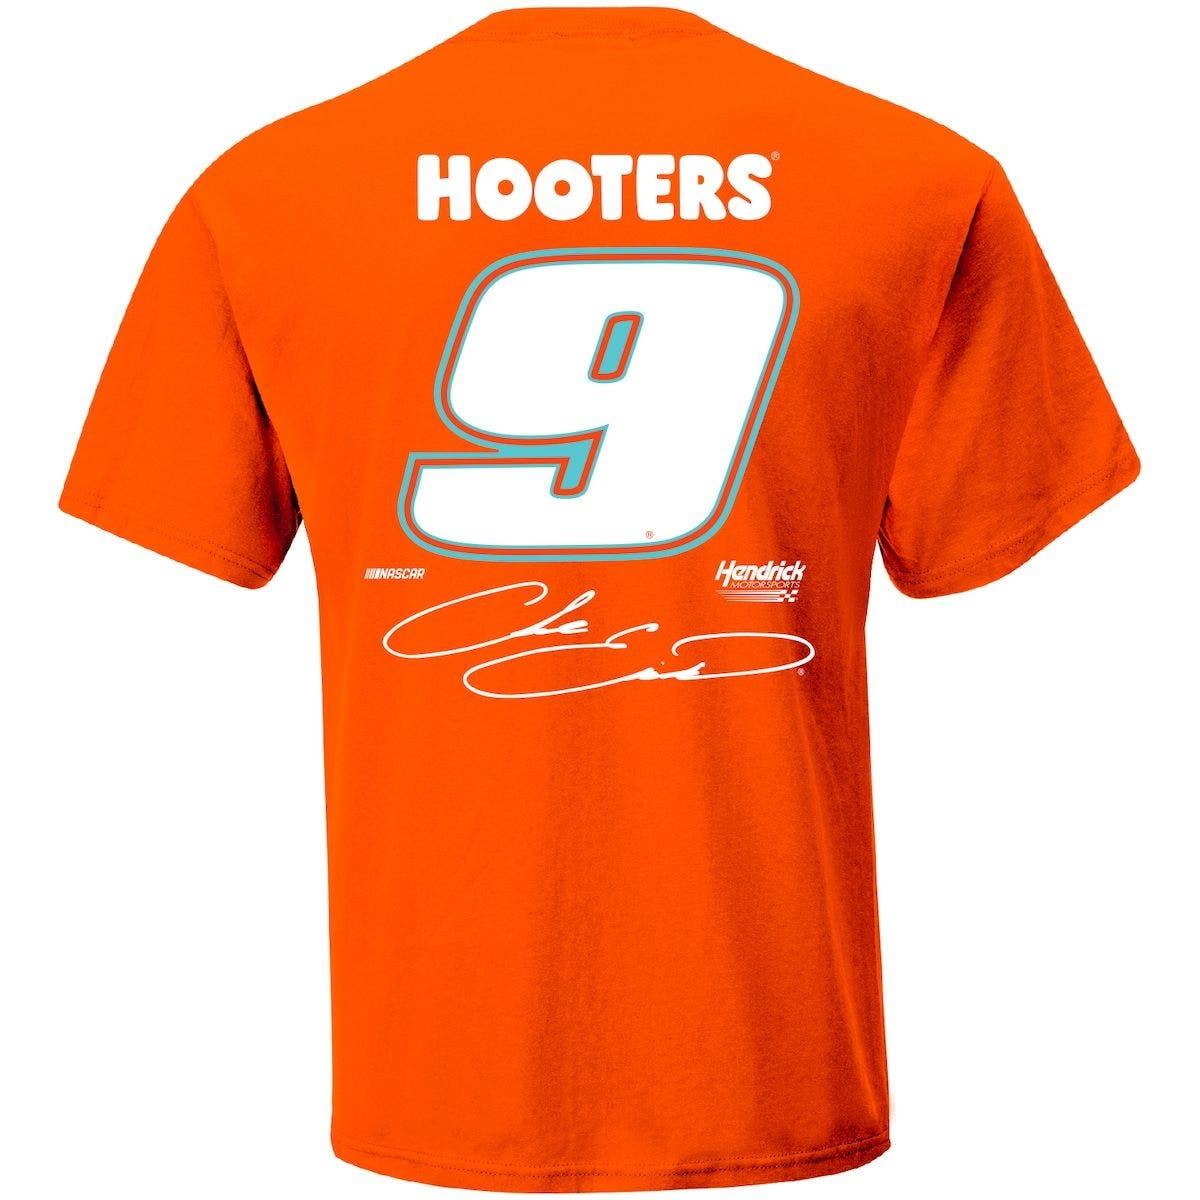 Hendrick Motorsports Team Collection Chase Elliott Hooters Pit